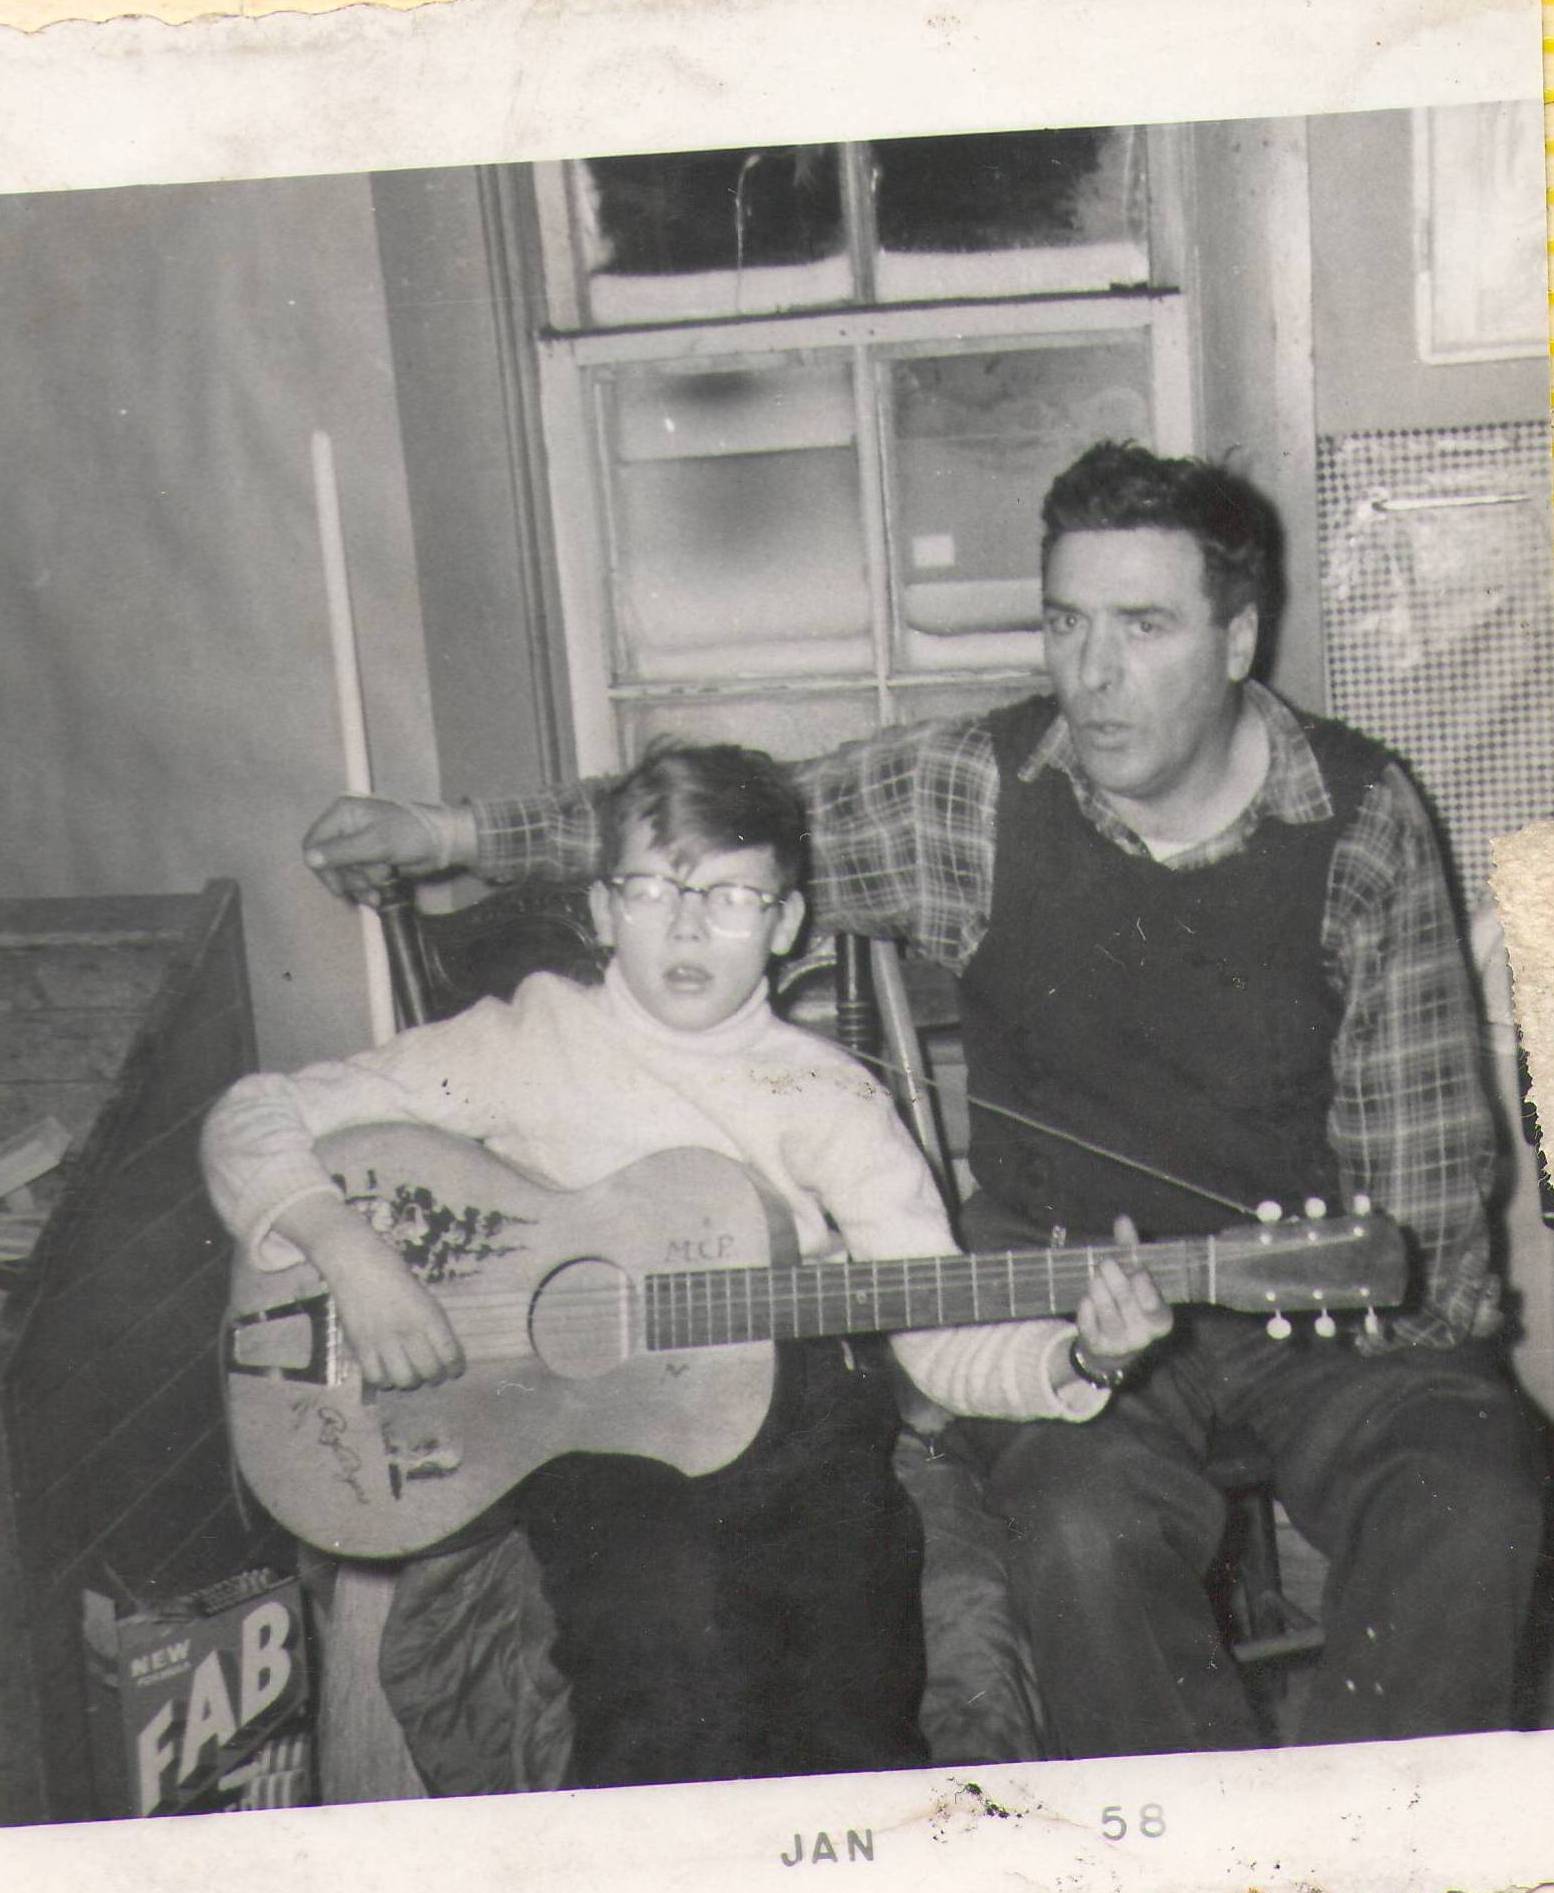 This picture comes from the Maria Lizotte collection and the young lad playing the guitar is labelled as Clifford Pettman - we are hoping you can help identify the older gentleman! Note the date at the bottom of the photo is "Jan 58"

2019.24.628 
 Lizotte Maria